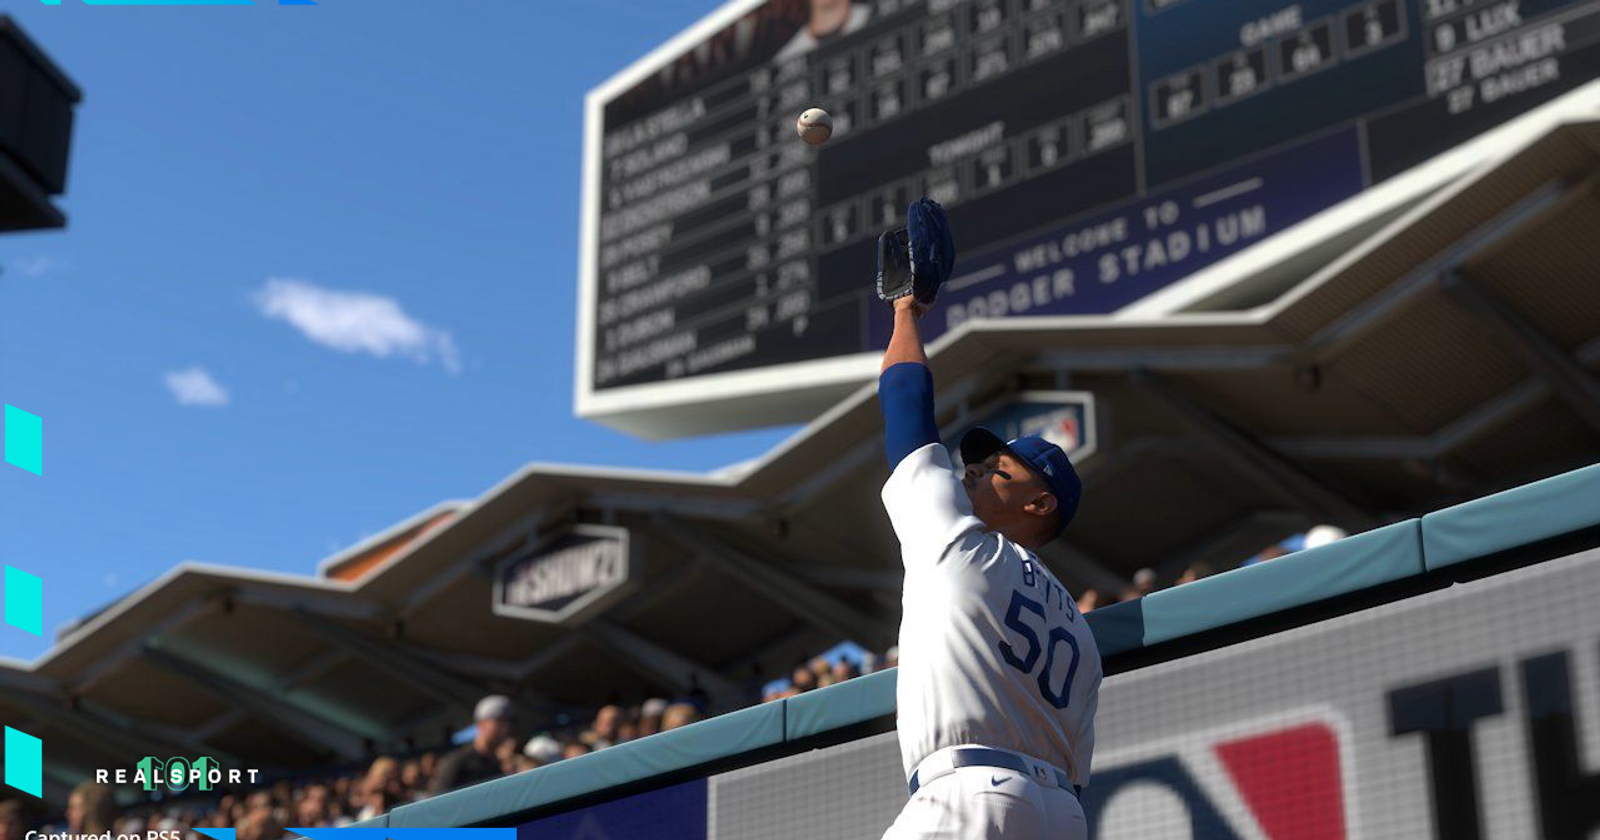 MLB The Show 21 Diamond Dynasty Guide to Getting Started